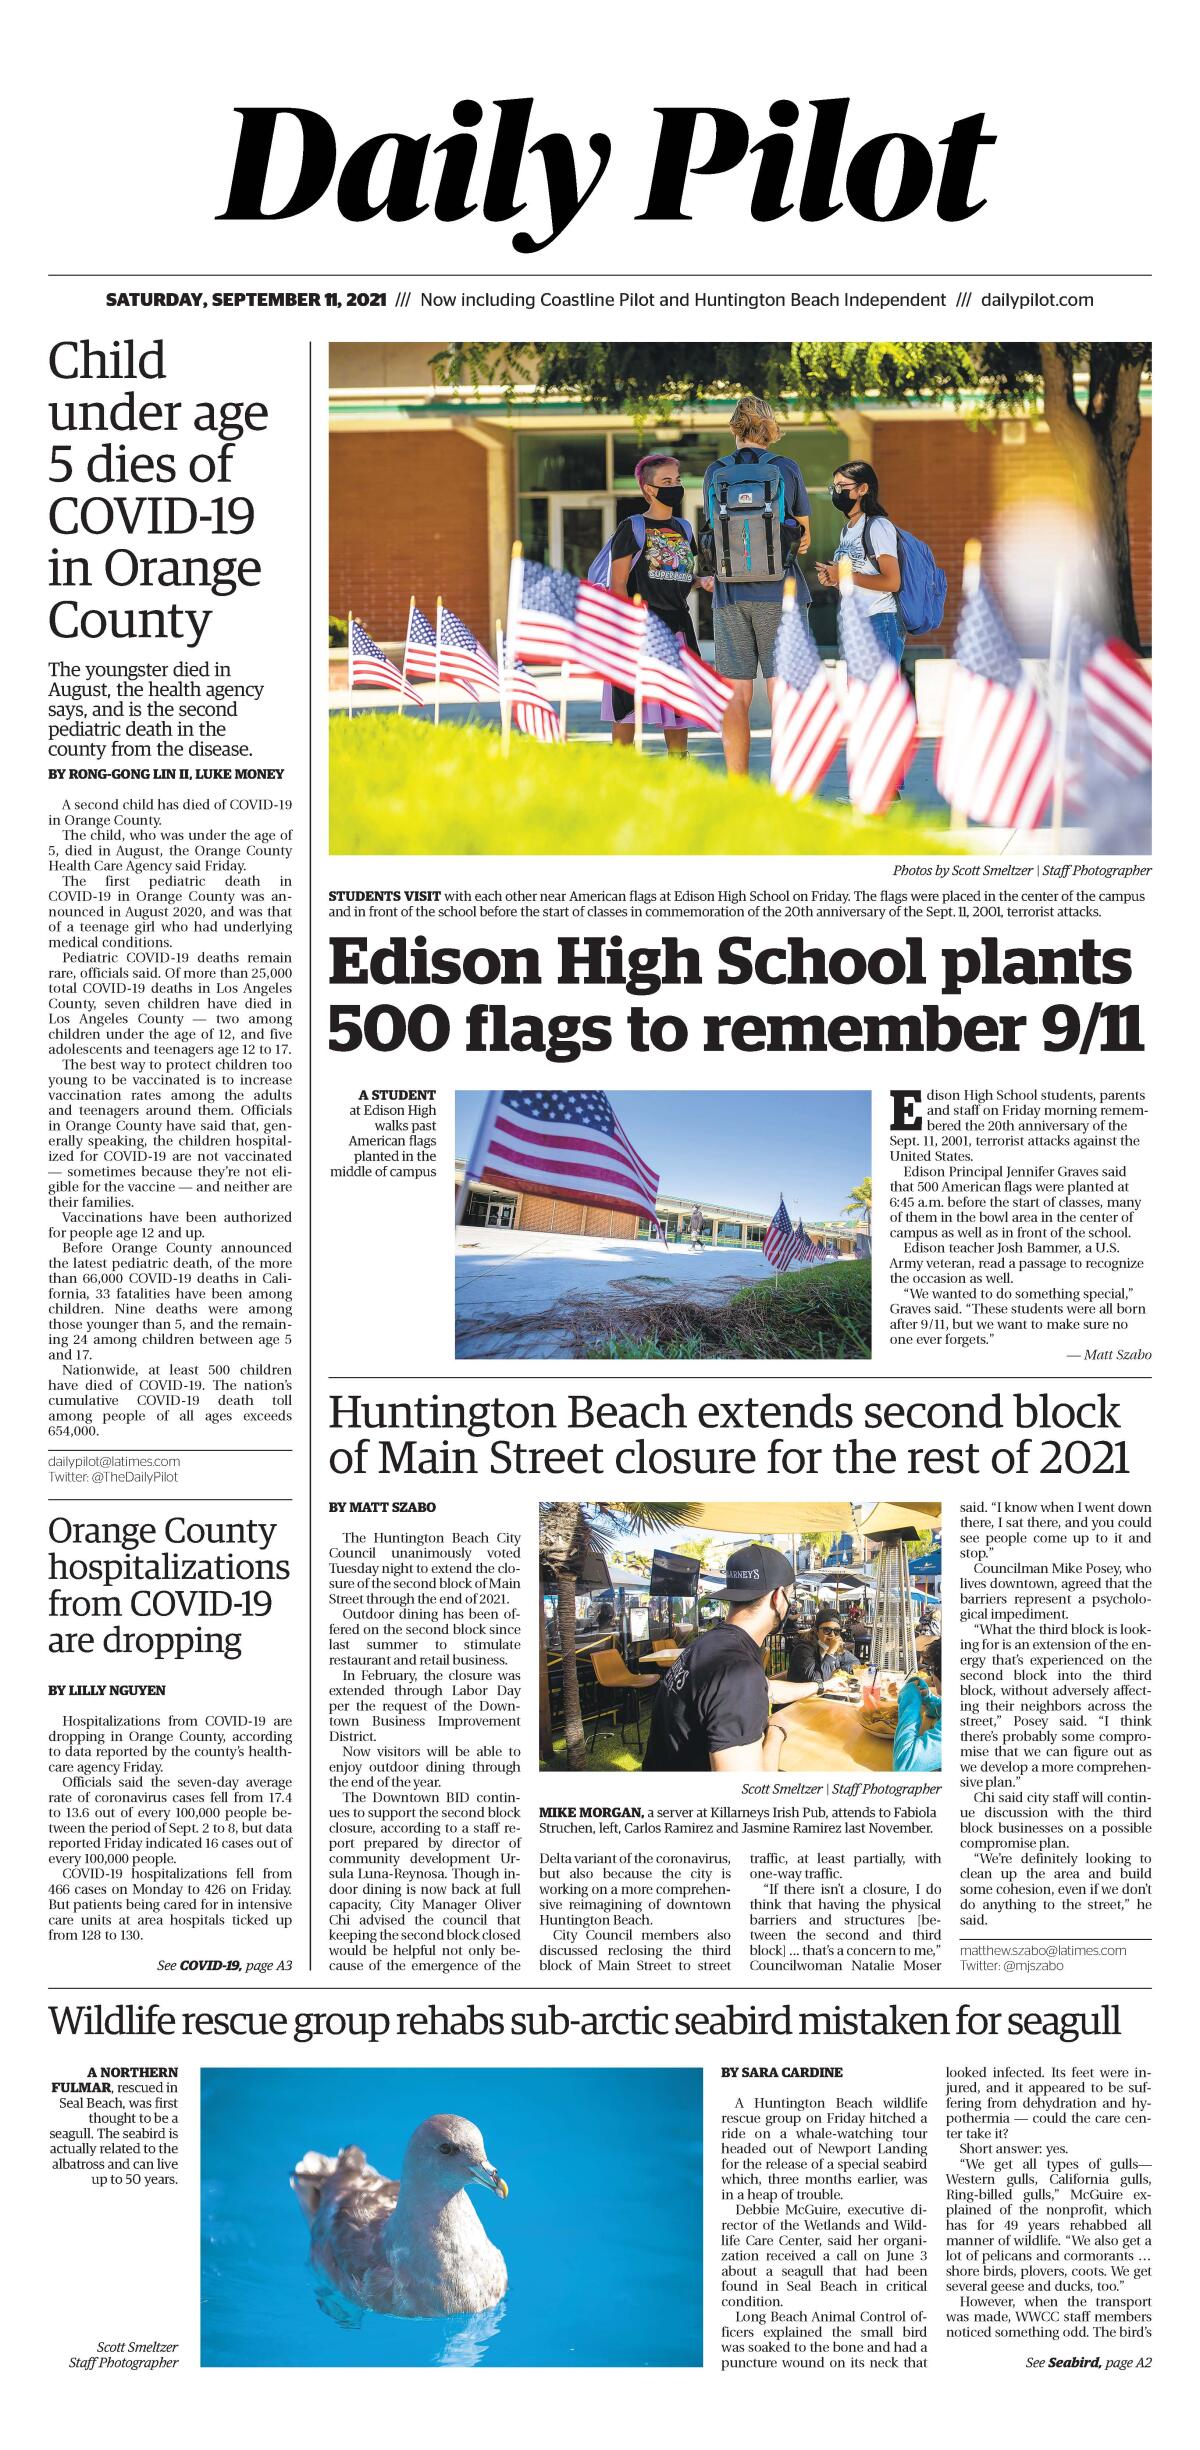 Front page of Daily Pilot e-newspaper for Saturday, Sept. 11, 2021.